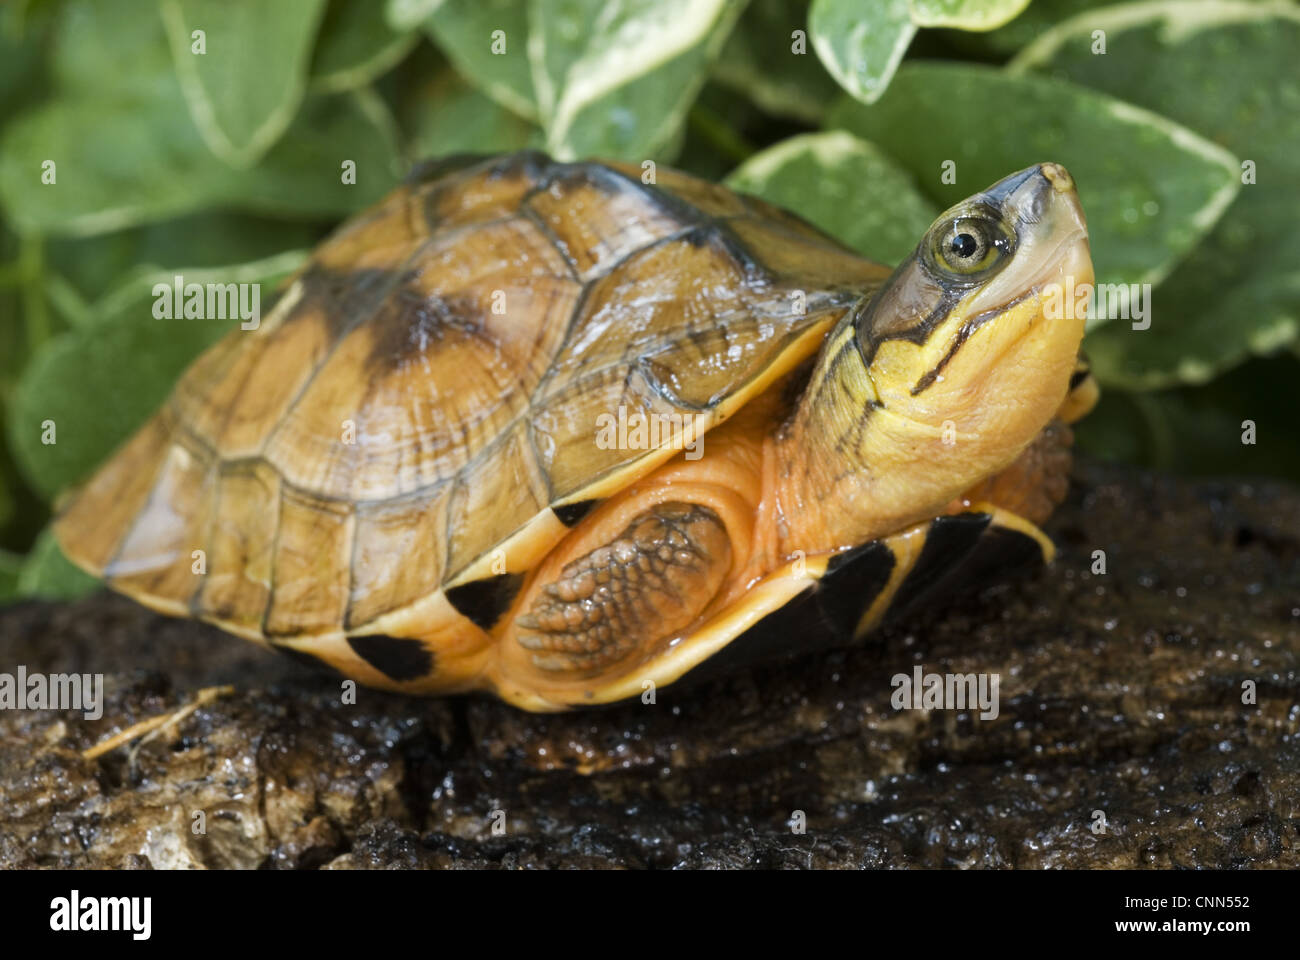 Chinese Three-striped Box Turtle (Cuora trifasciata) young, resting on log (captive) Stock Photo